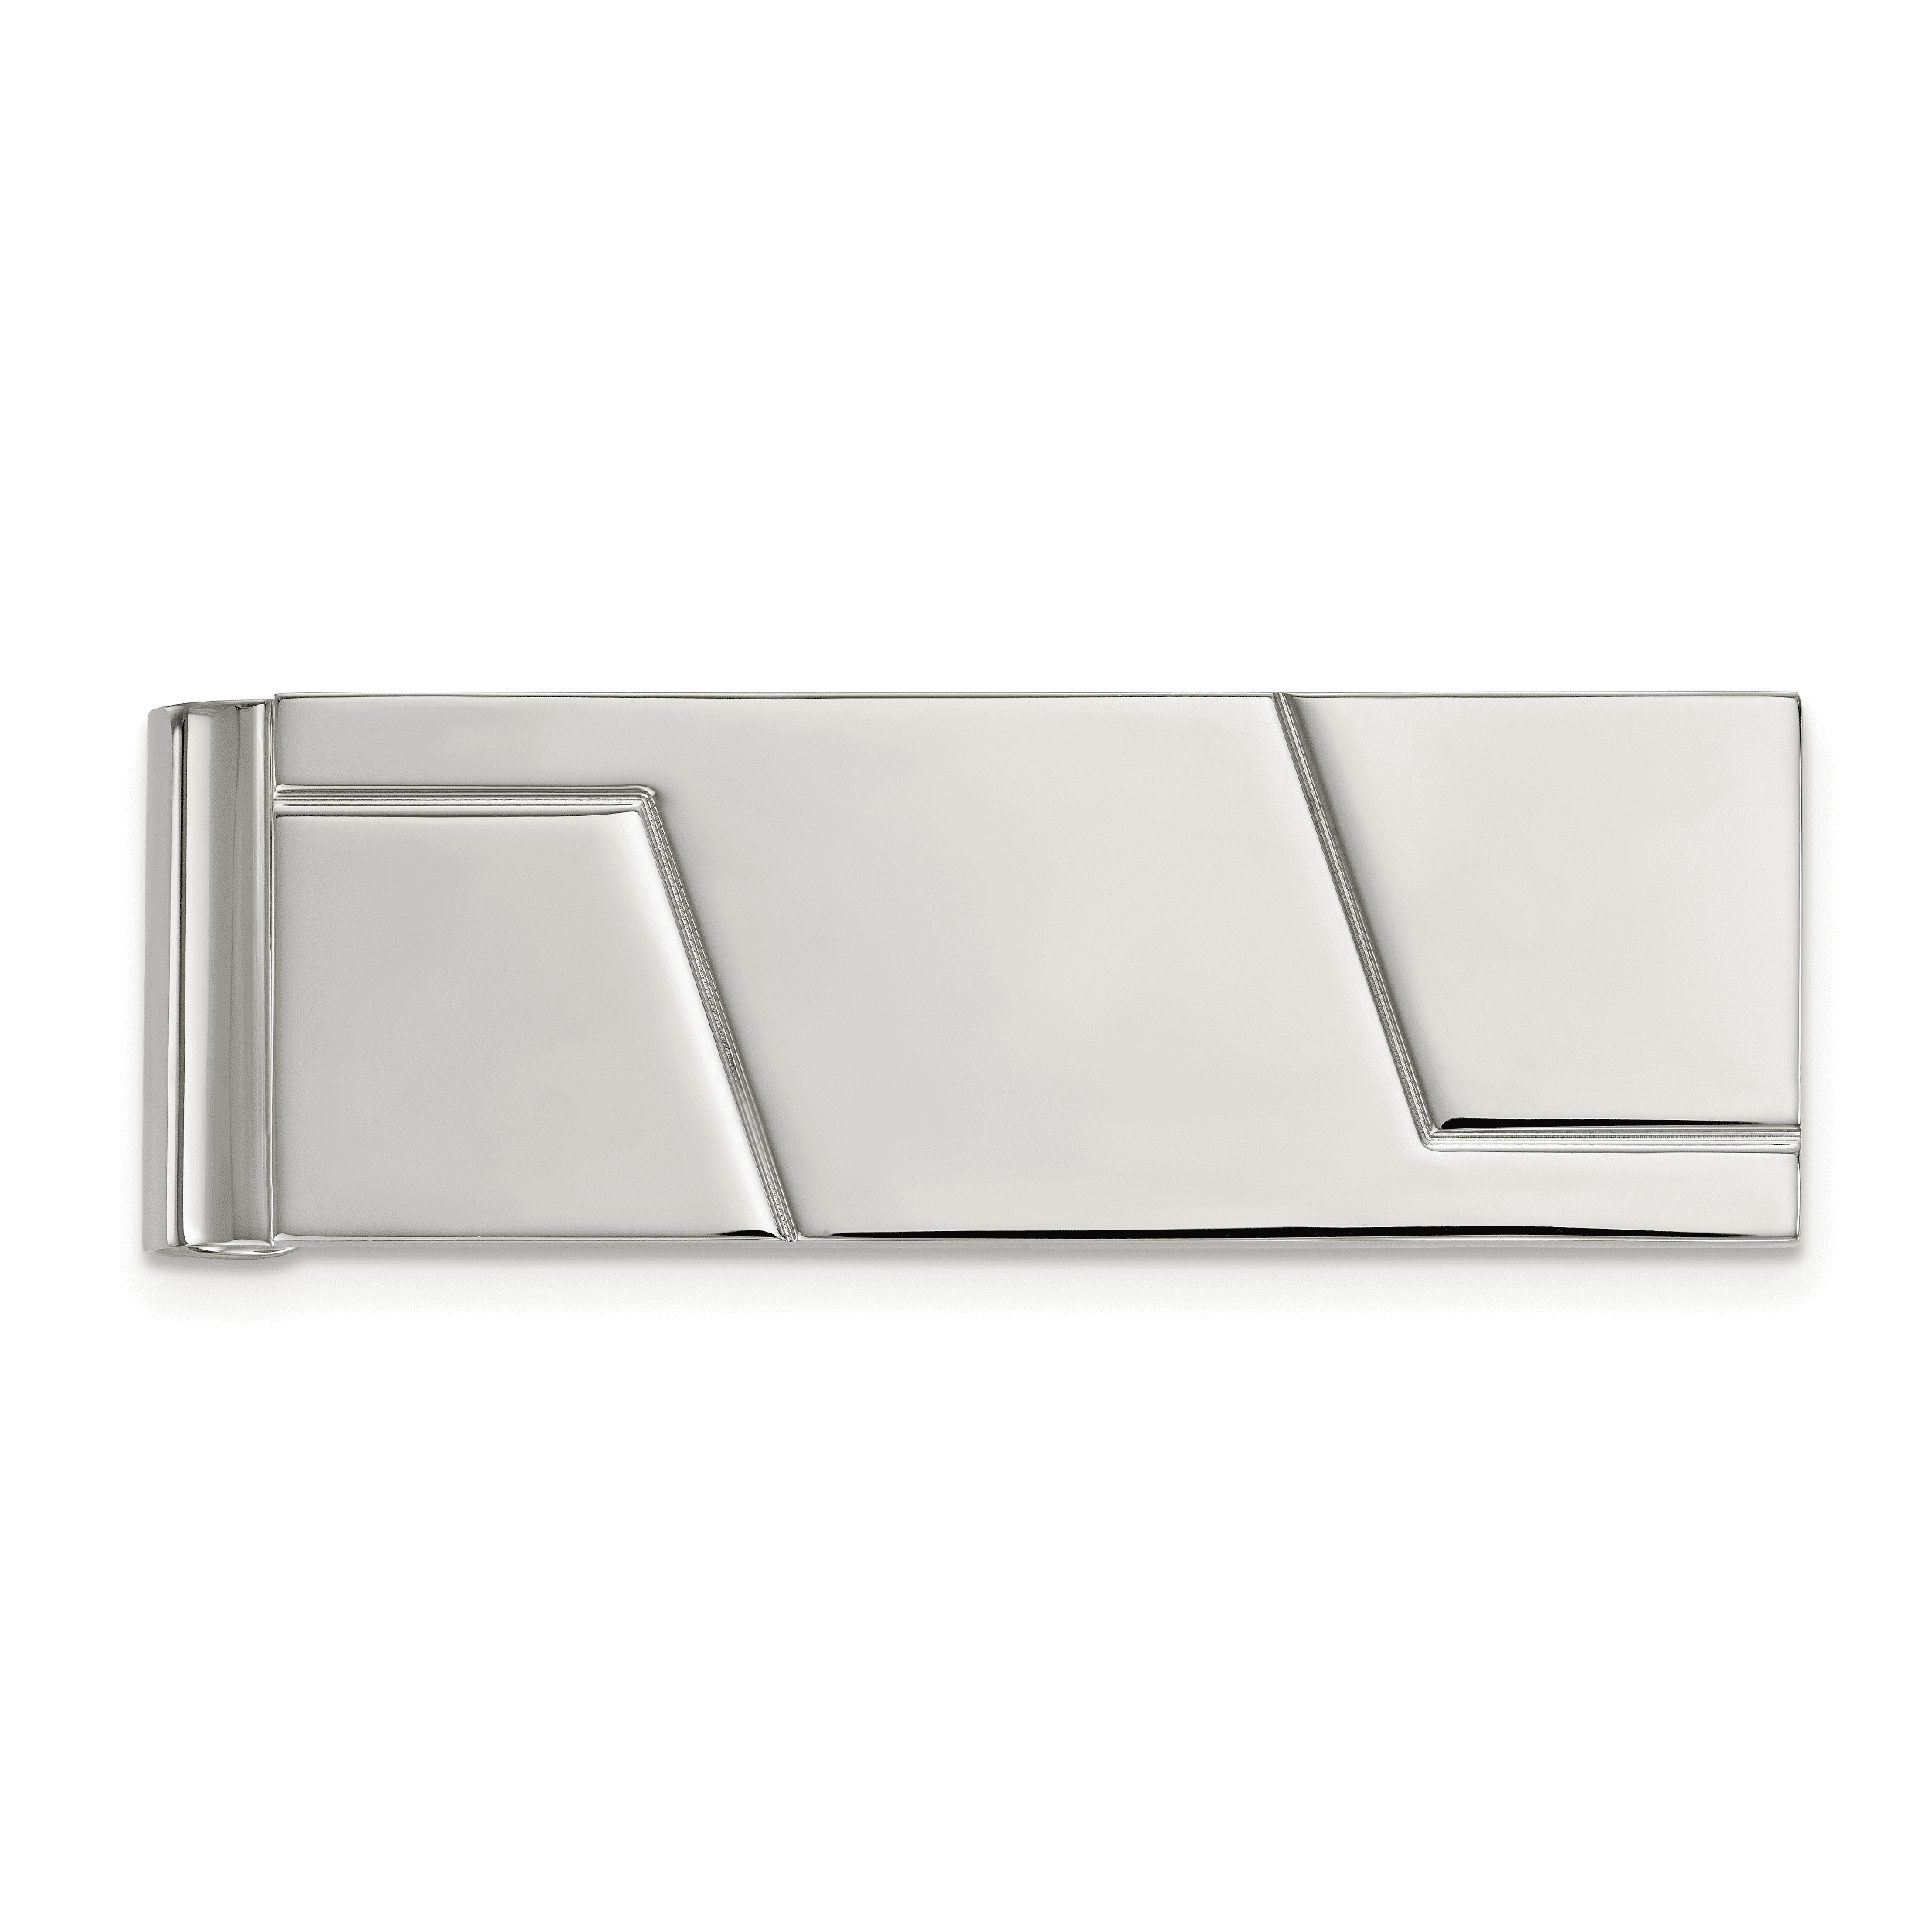 15.9mm x 52.9mm Jewel Tie Stainless Steel Polished Money Clip 